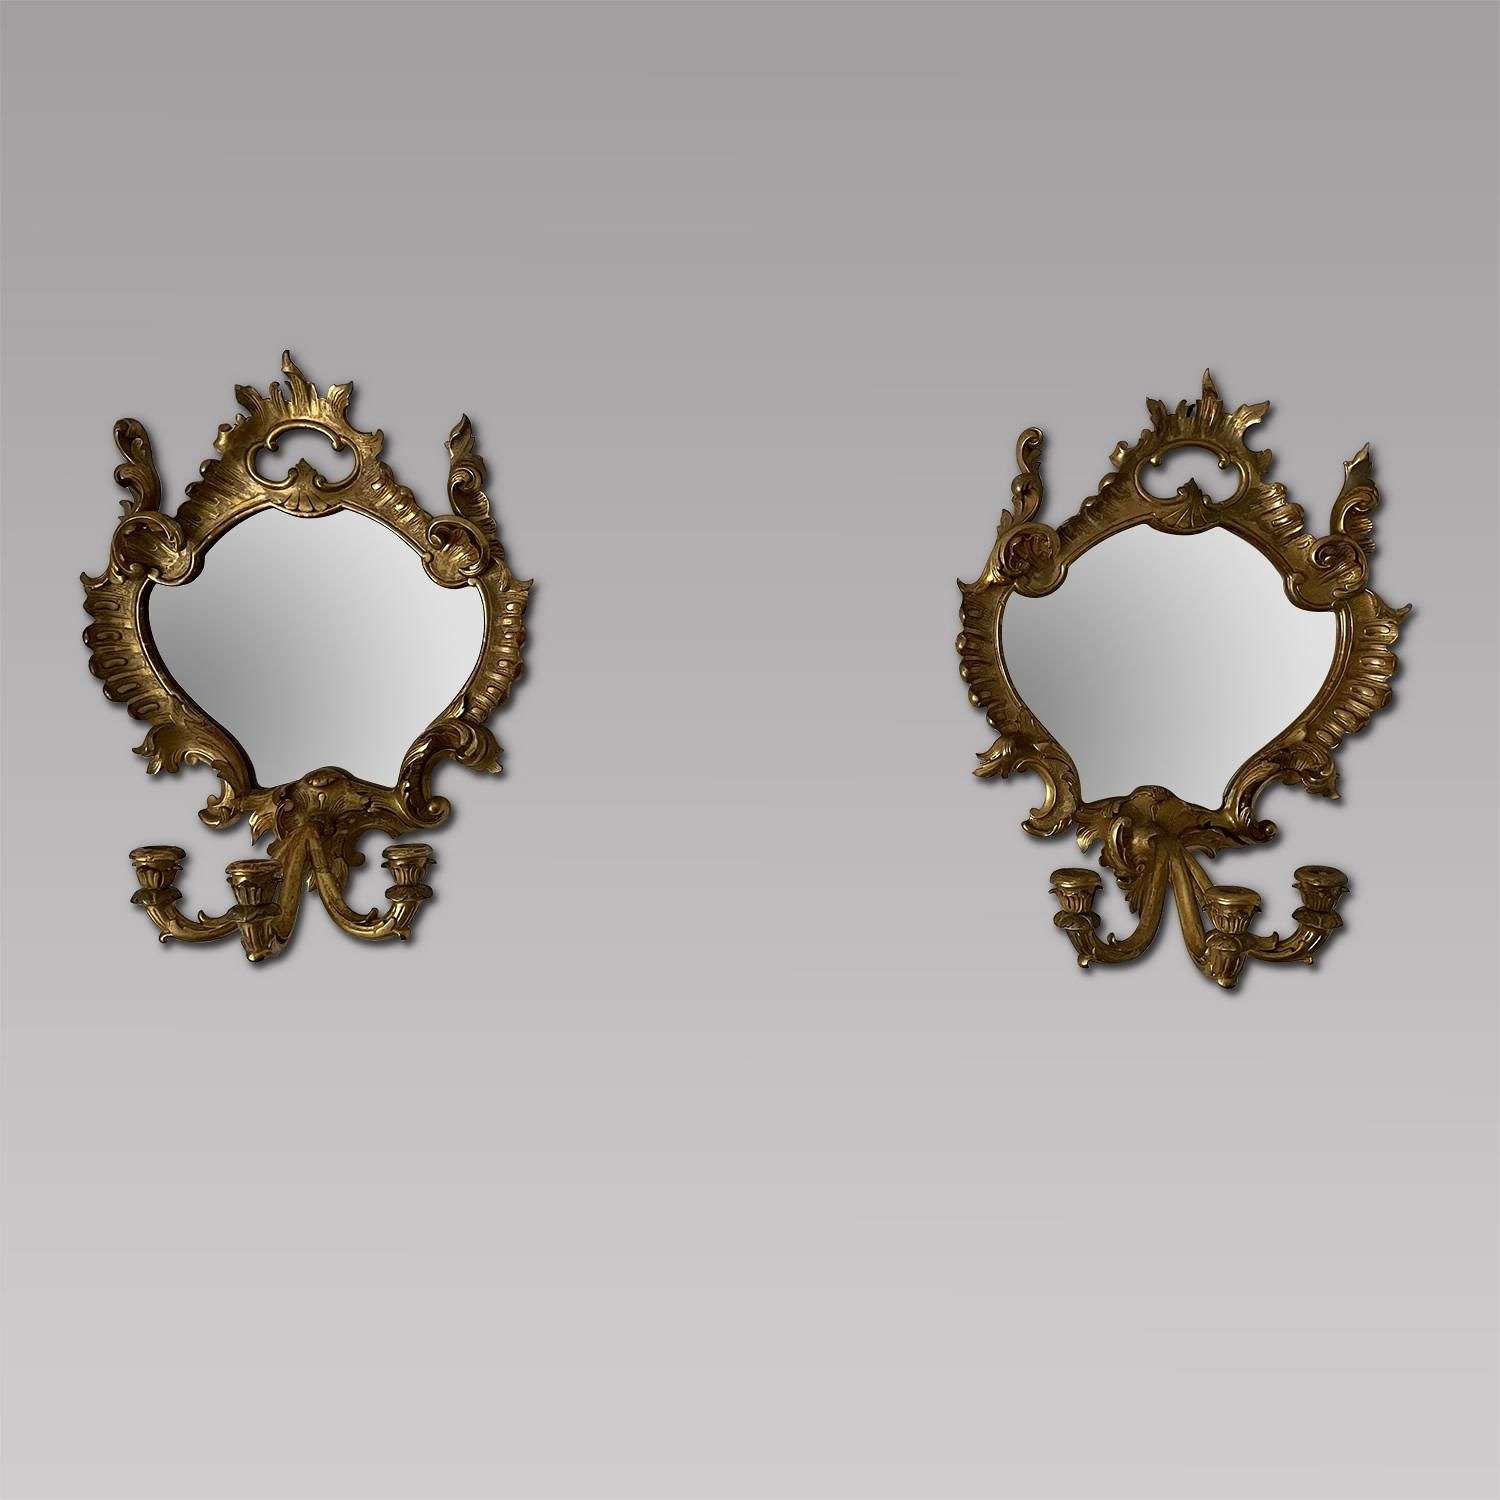 Pair of Decorative Florentine Style Wall Mirrors